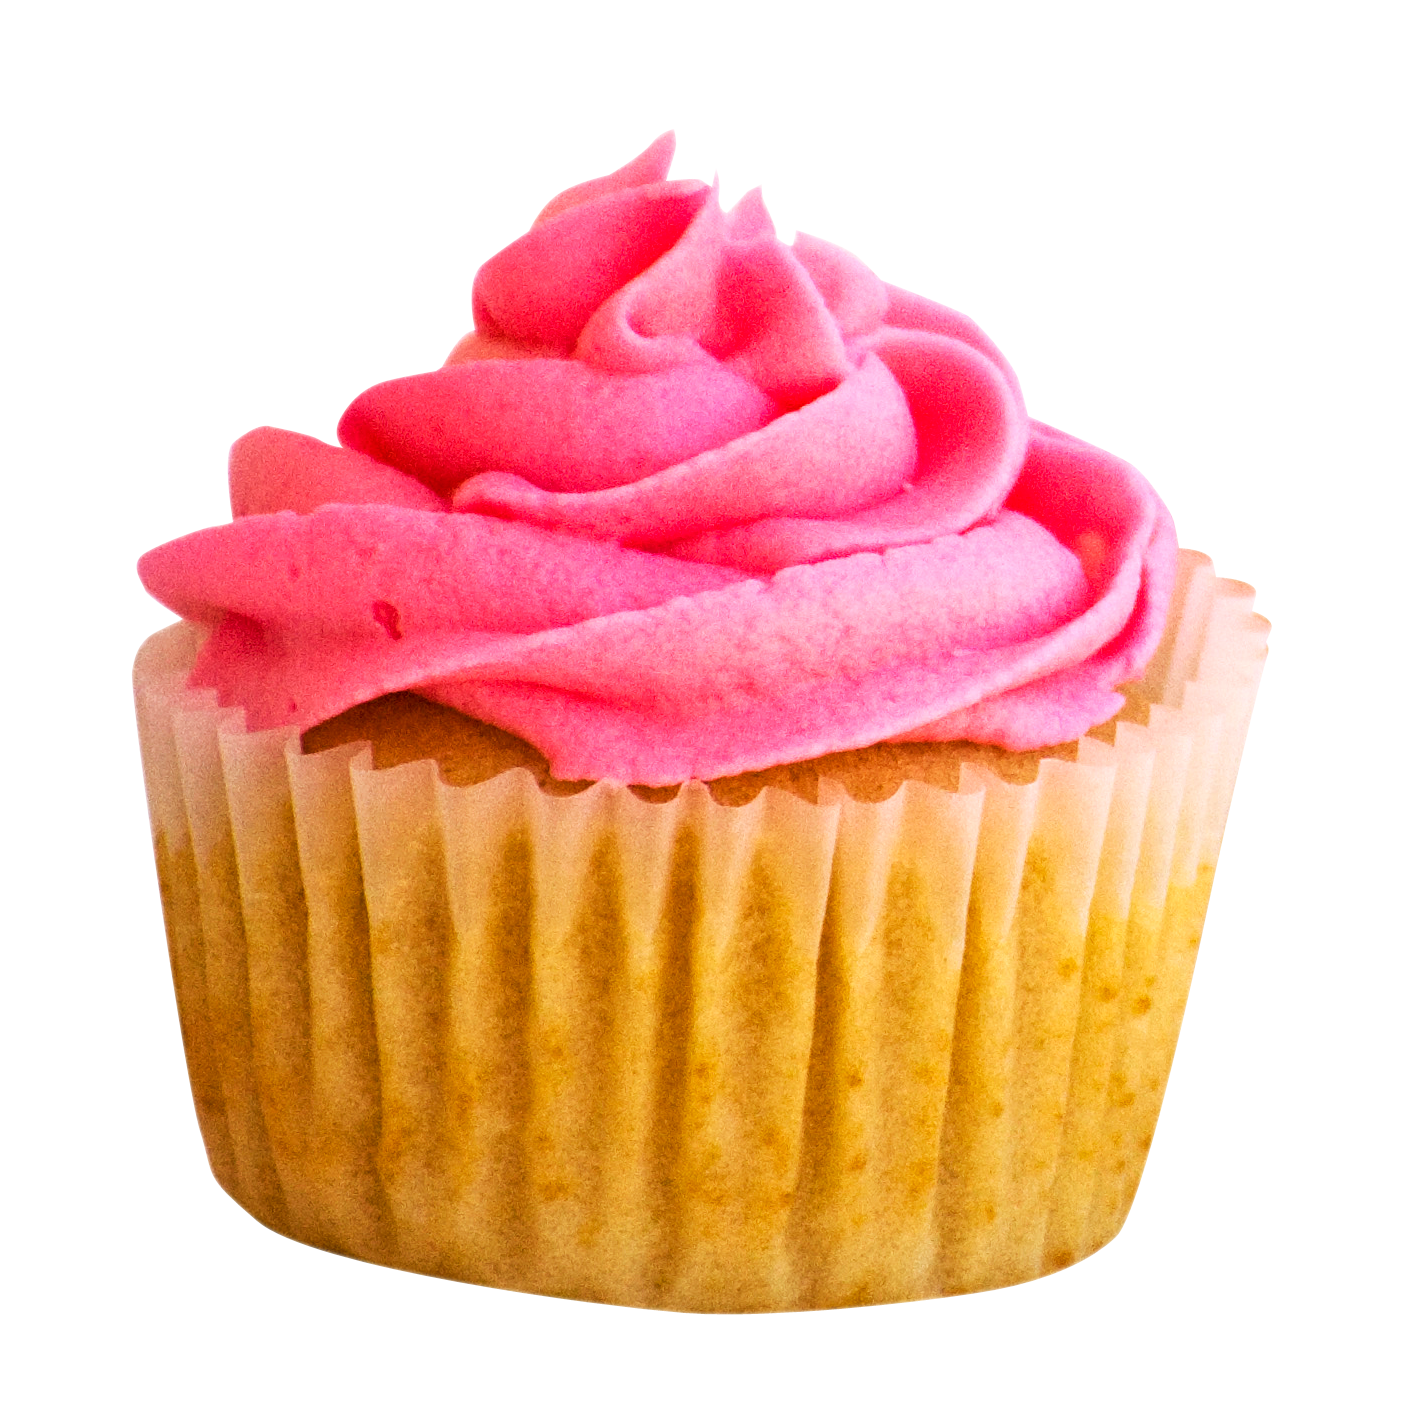 A Cupcake With Pink Frosting